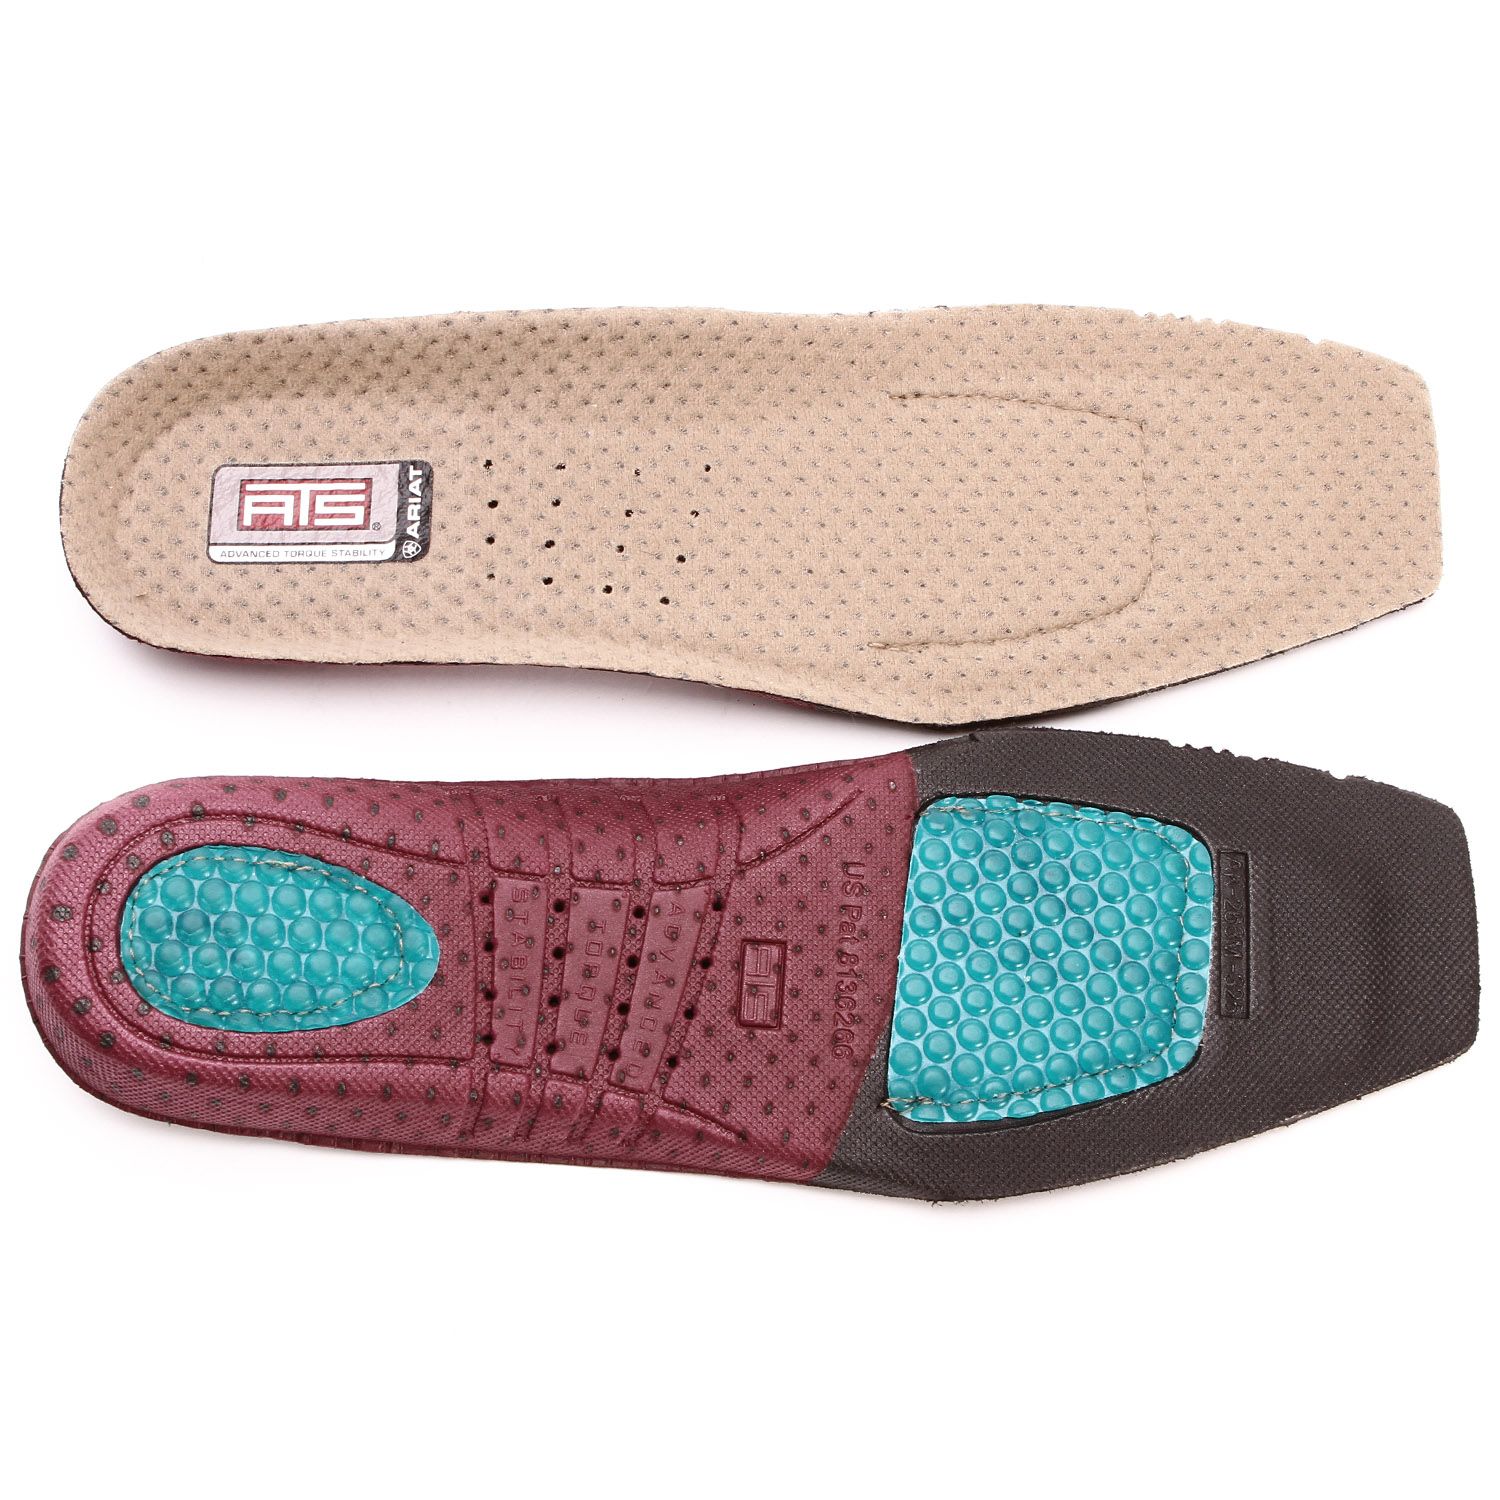 Choose Size Ariat Women's Square Toe Insoles ATS Footbeds 